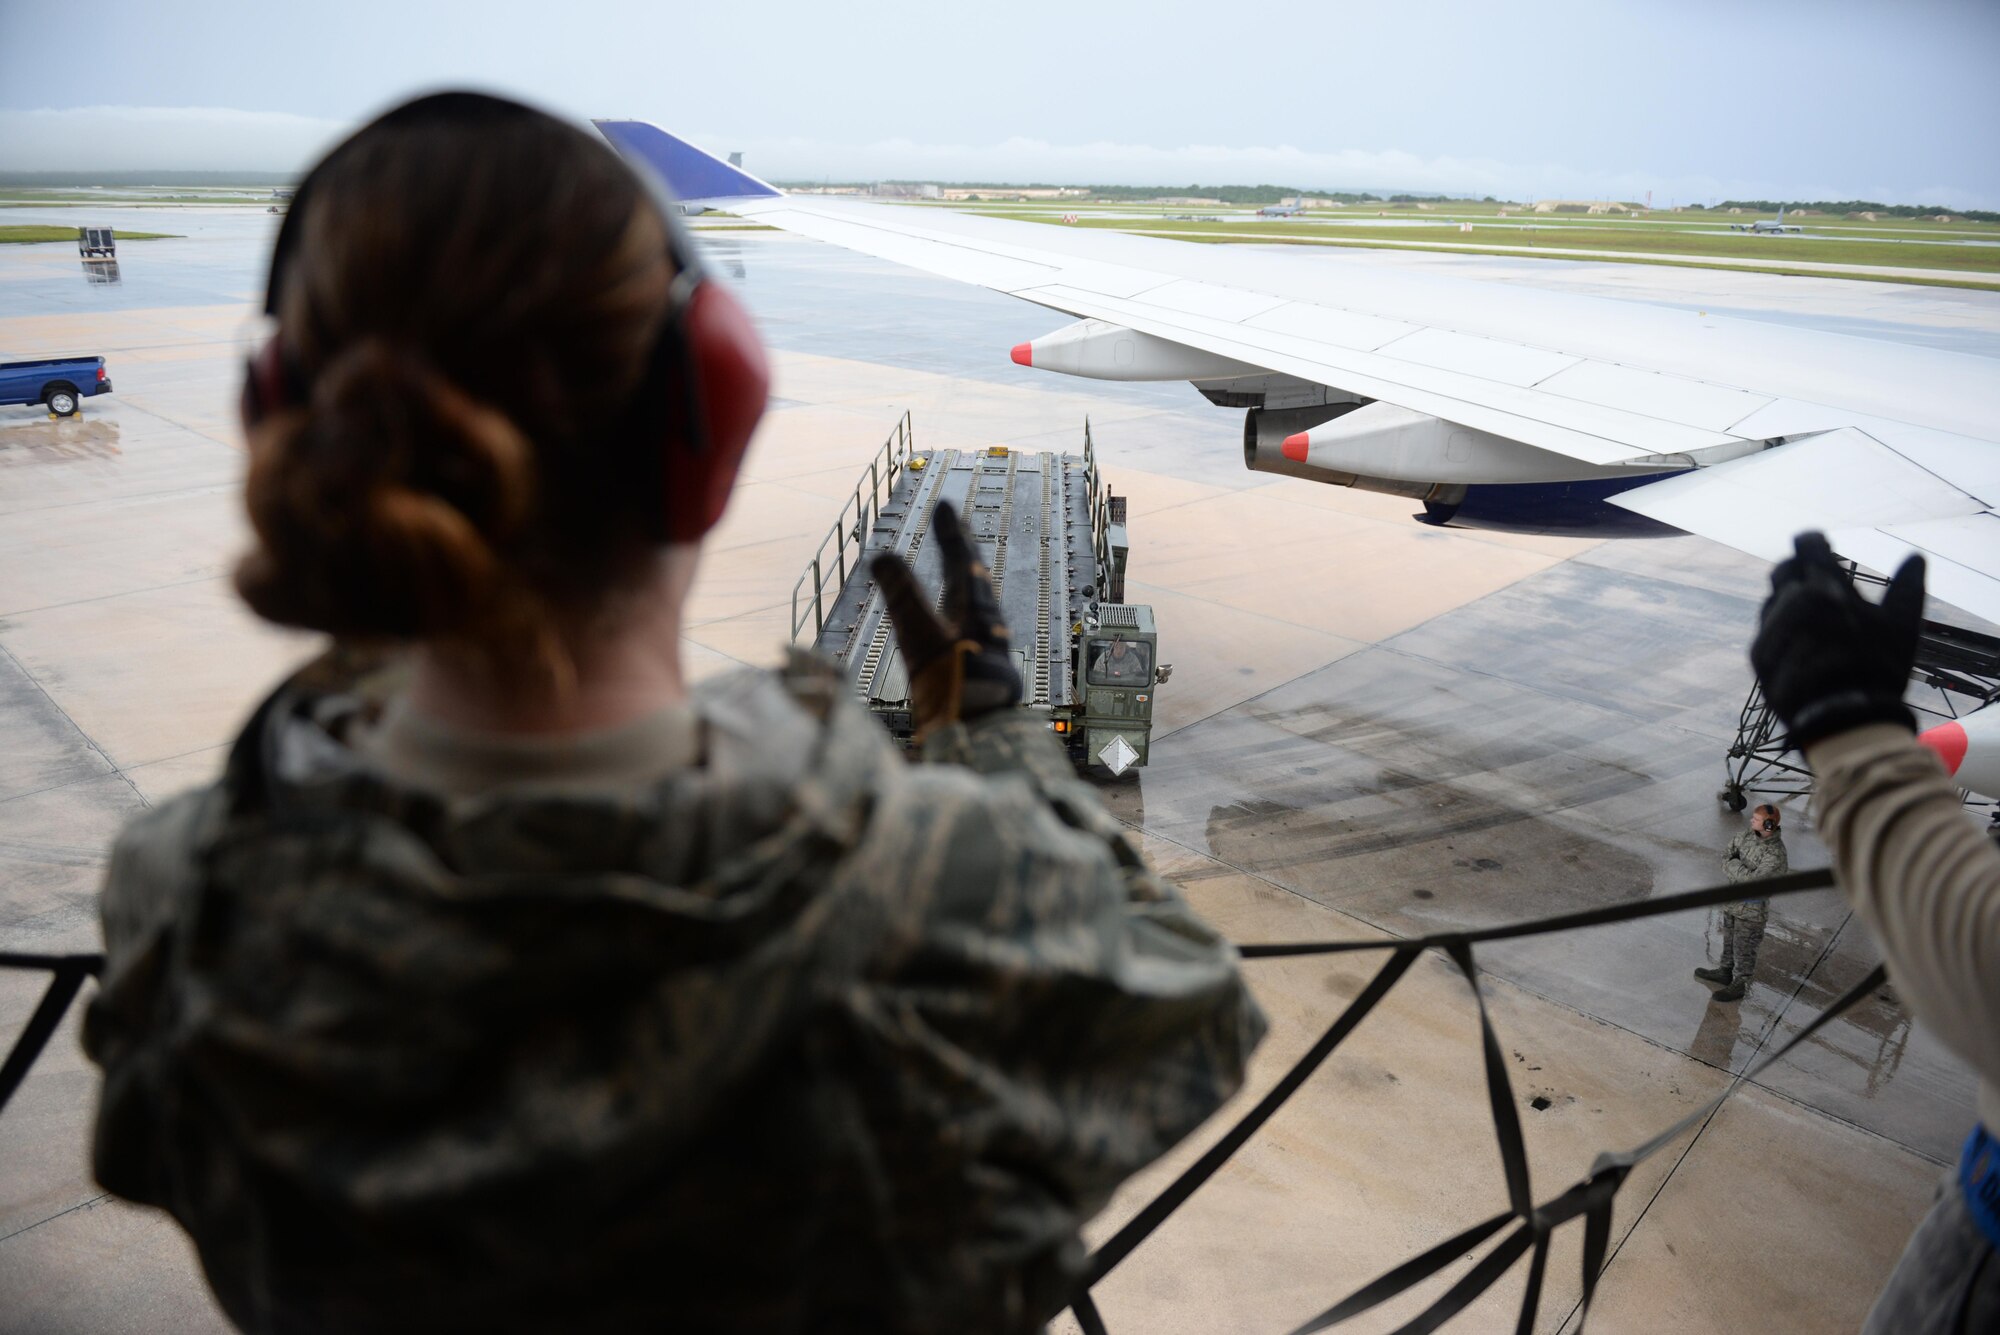 Senior Airman Hannah Stewart, 734th Air Mobility Squadron aircraft services technician, directs a Tunner 60K aircraft cargo loader as it approaches a Boeing 747 Sept. 7, 2016, at Andersen Air Force Base, Guam.The 734th AMS provides the capability to move cargo, personnel and equipment at a high velocity, ensuring Andersen AFB is prepared to meet mission requirements.(U.S. Air Force photo by Airman 1st Class Jacob Skovo)